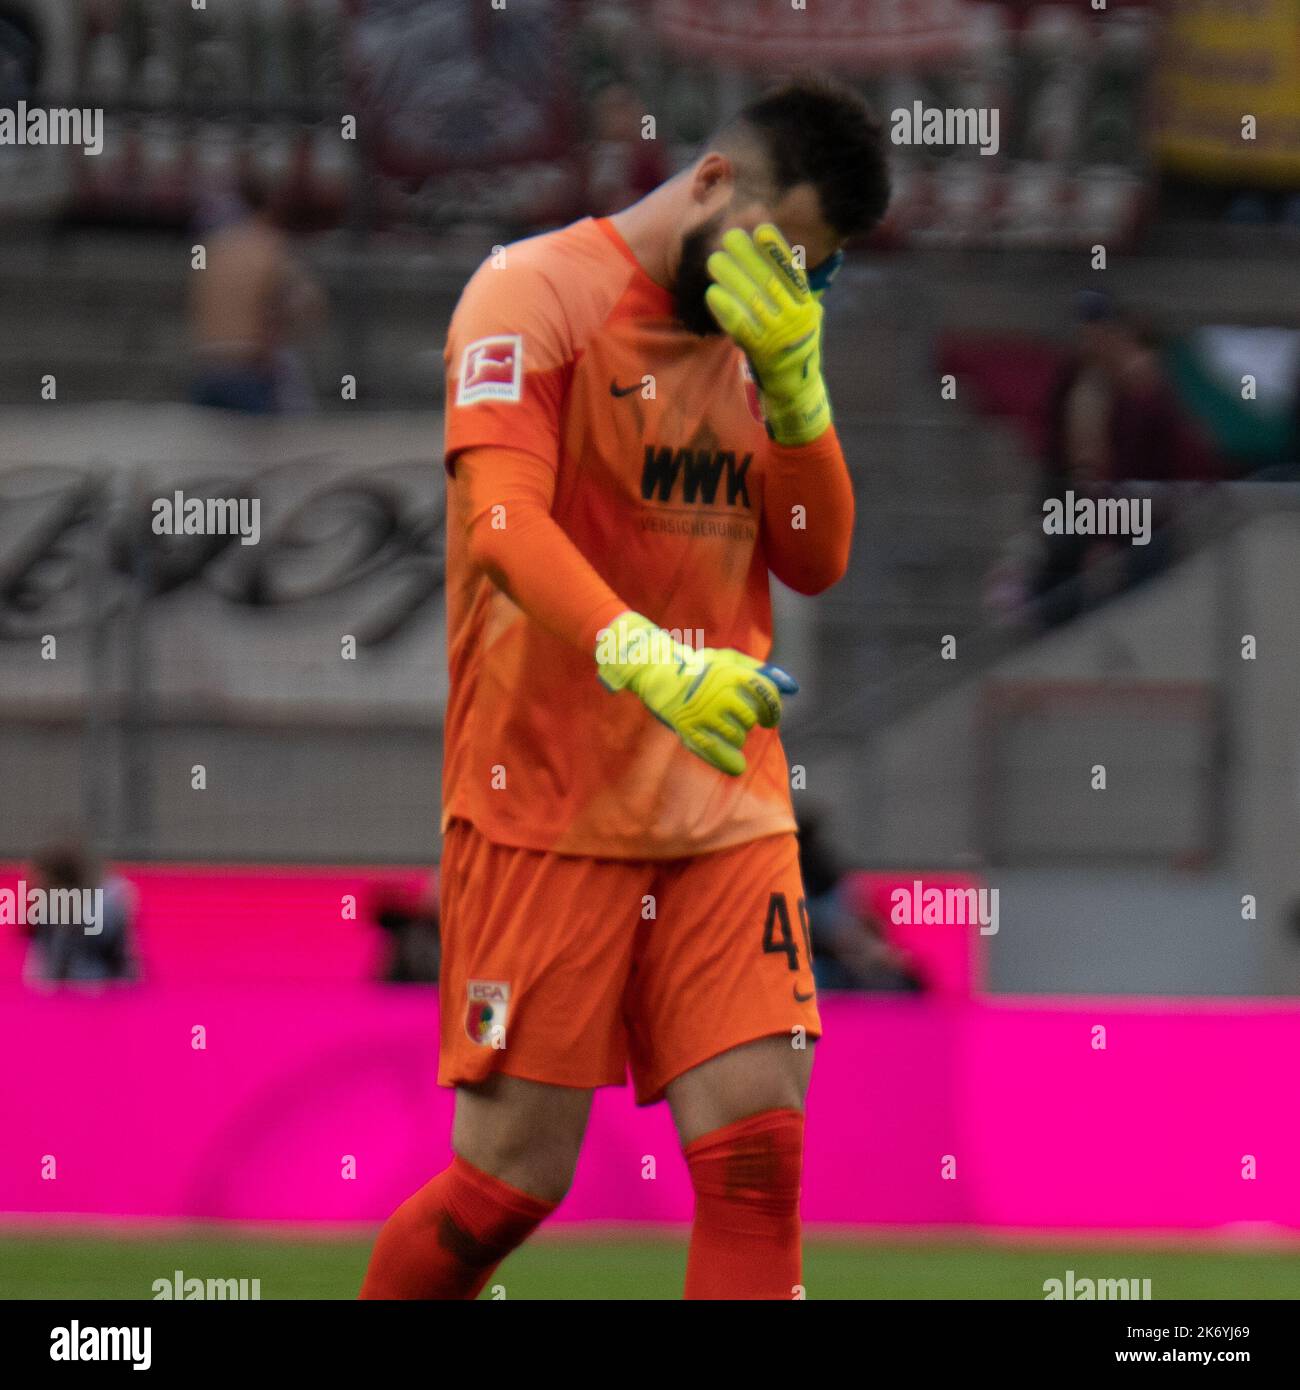 Cologne, North Rhine-Westphalia, Germany. 16th Oct, 2022. FC Augsburg  goalkeeper TOMAS KOUBEK (40) wipes his face after the FC Cologne vs. FC  Augsburg Bundesliga match at the RheinEnergieStadion in Cologne, Germany on